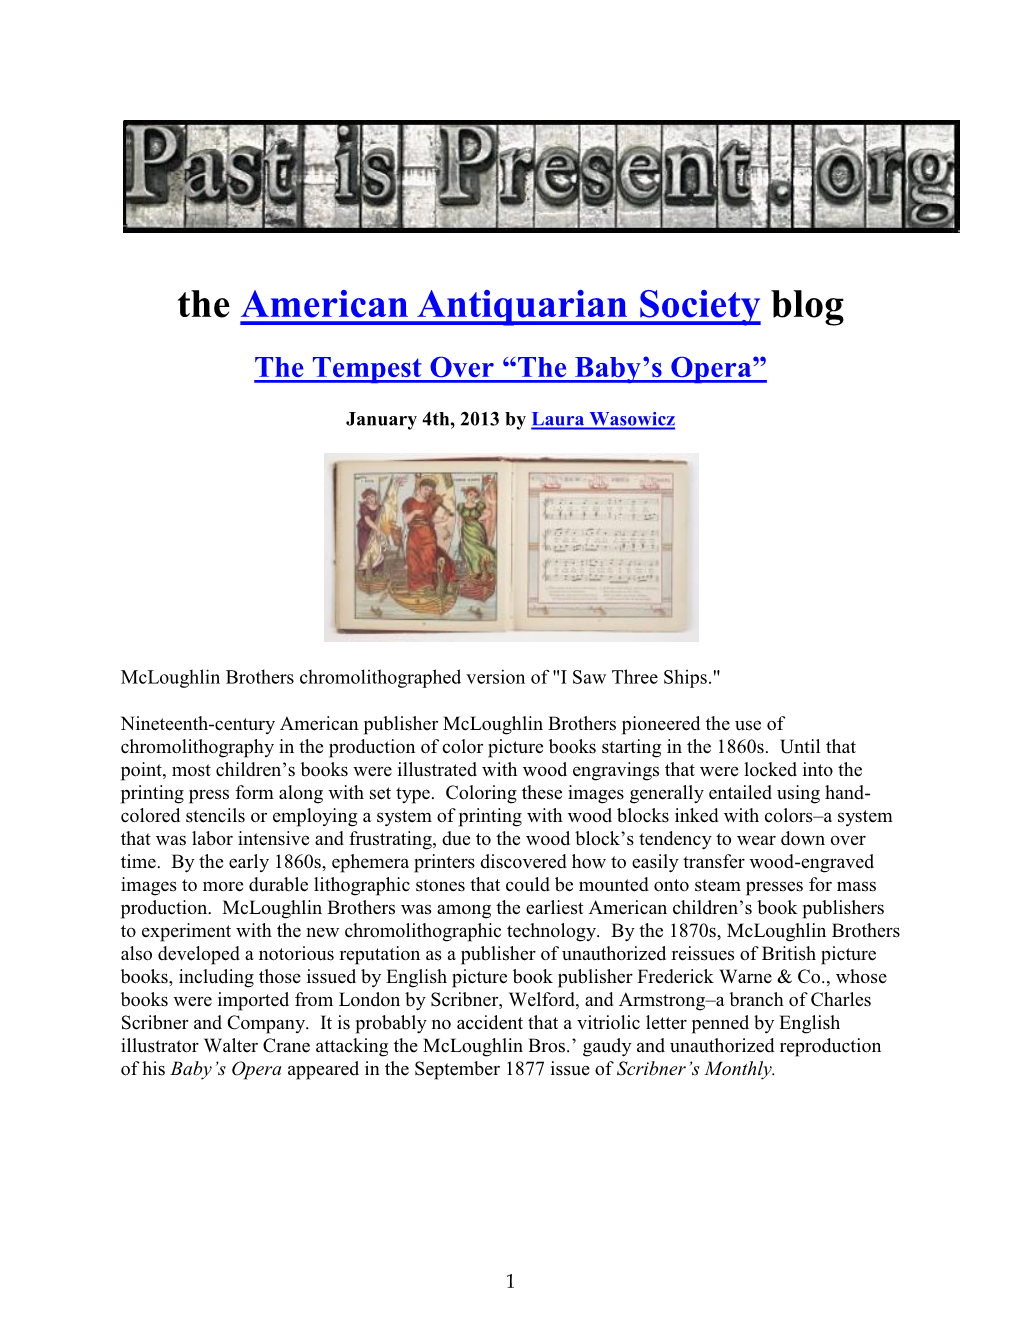 The American Antiquarian Society Blog the Tempest Over “The Baby’S Opera”